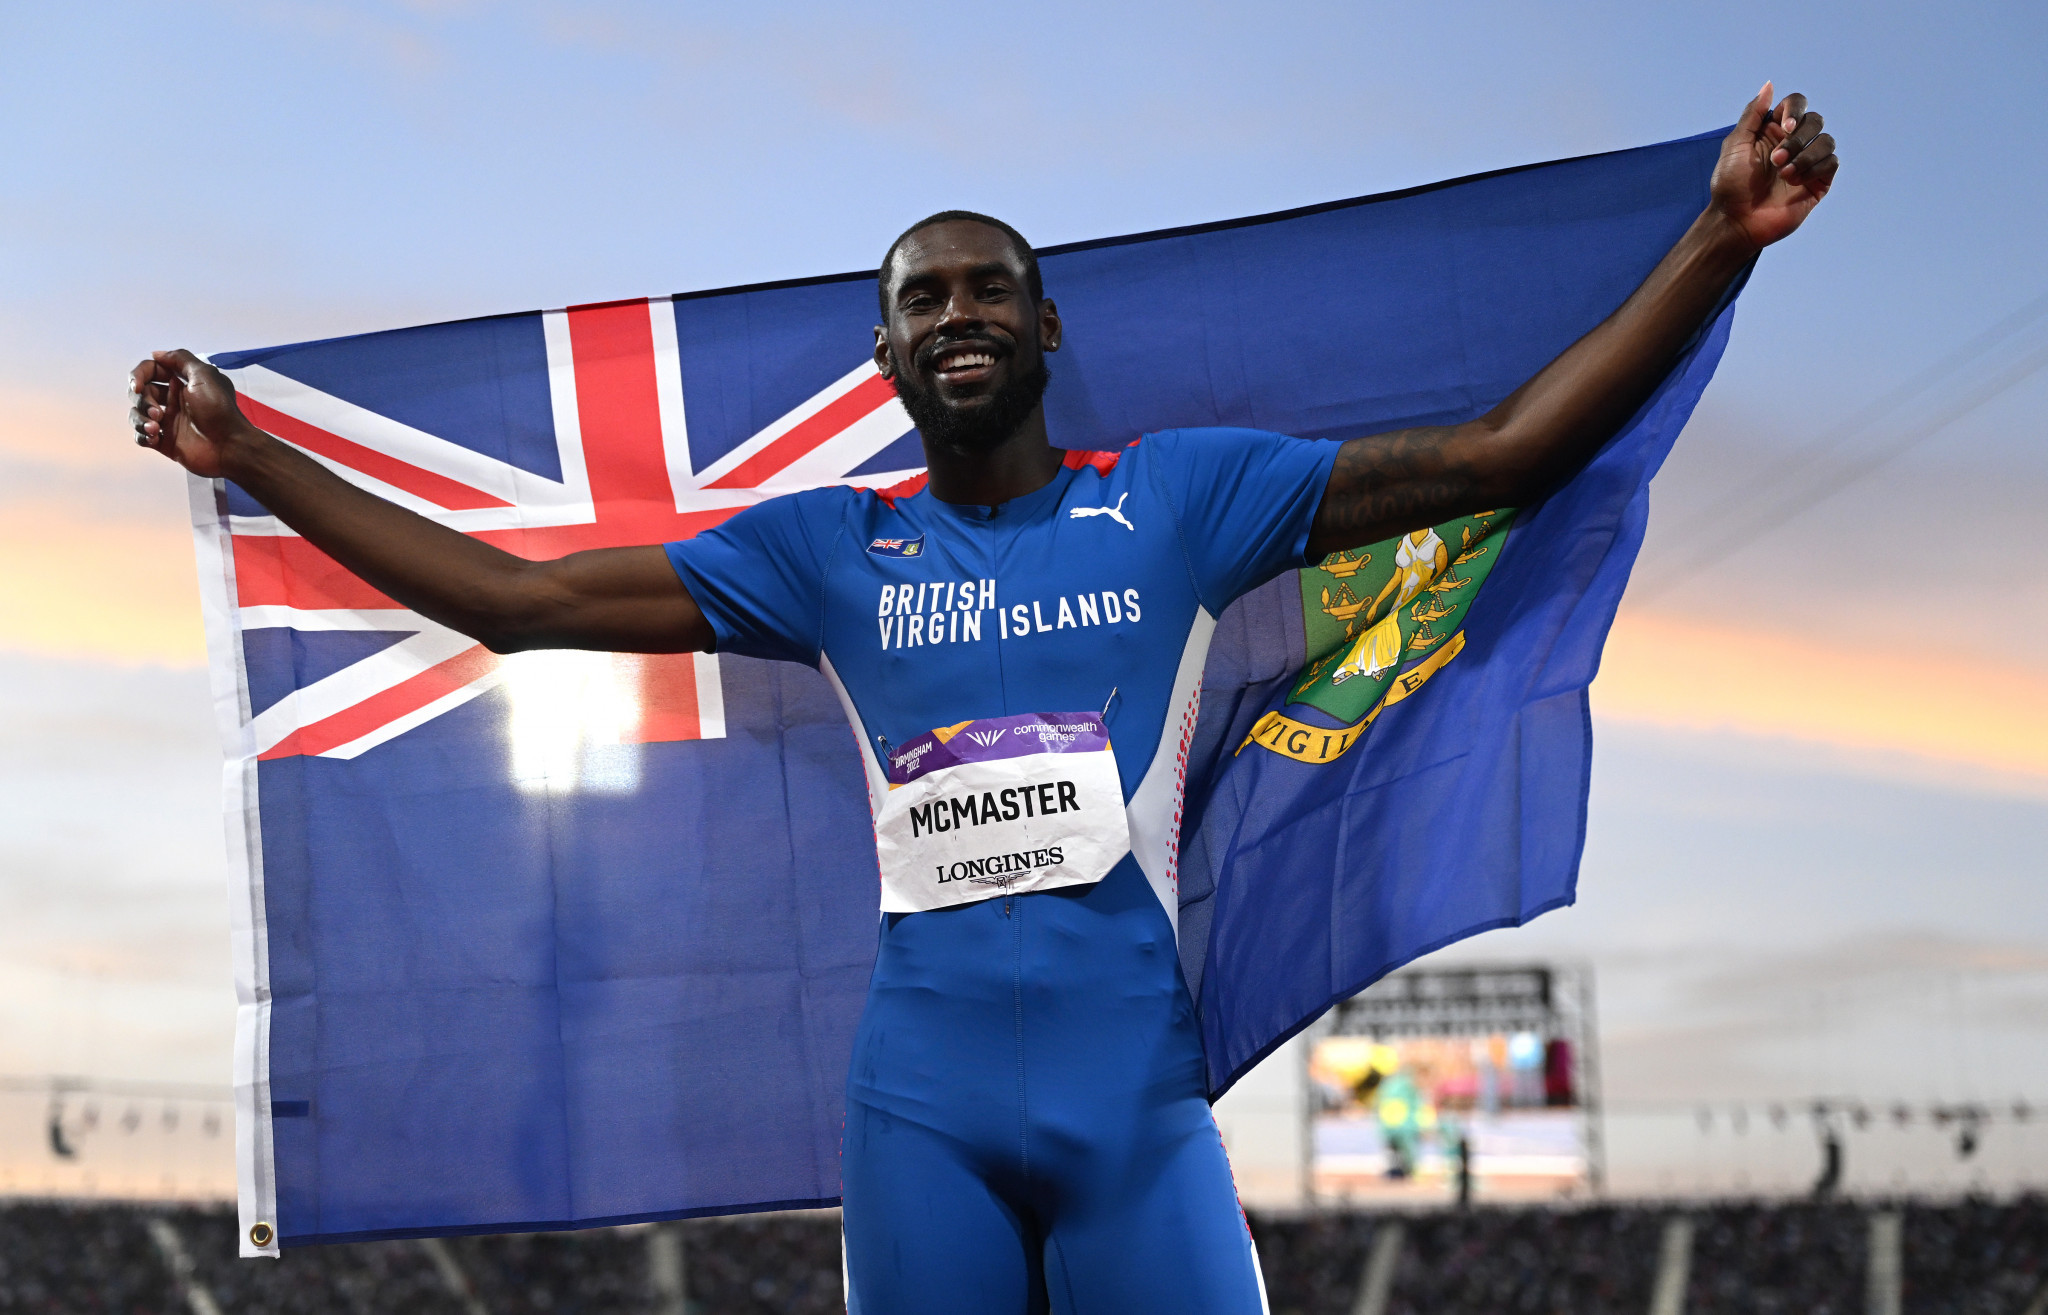 Kyron McMaster secured the men's 400m hurdles title in the Bahamas ©Getty Images